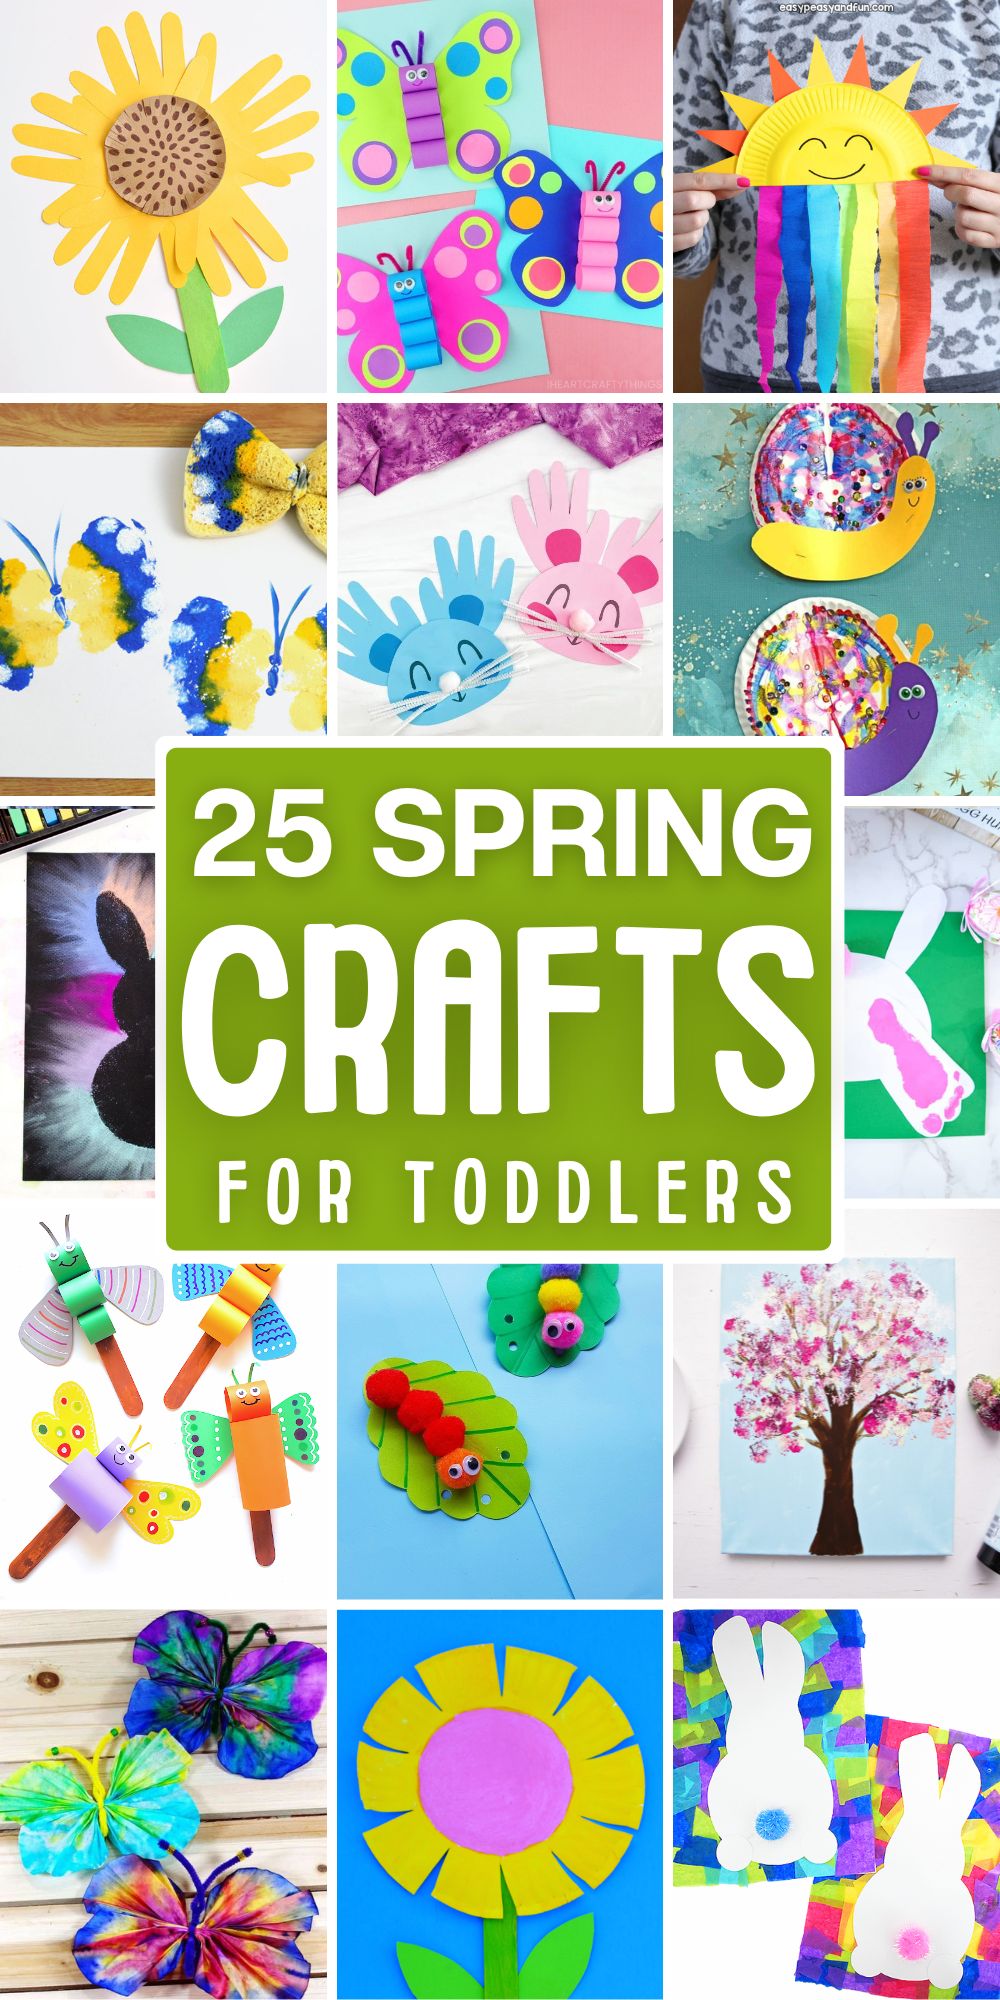 25 Easy Spring Crafts for Toddlers - Ak Pal Kitchen